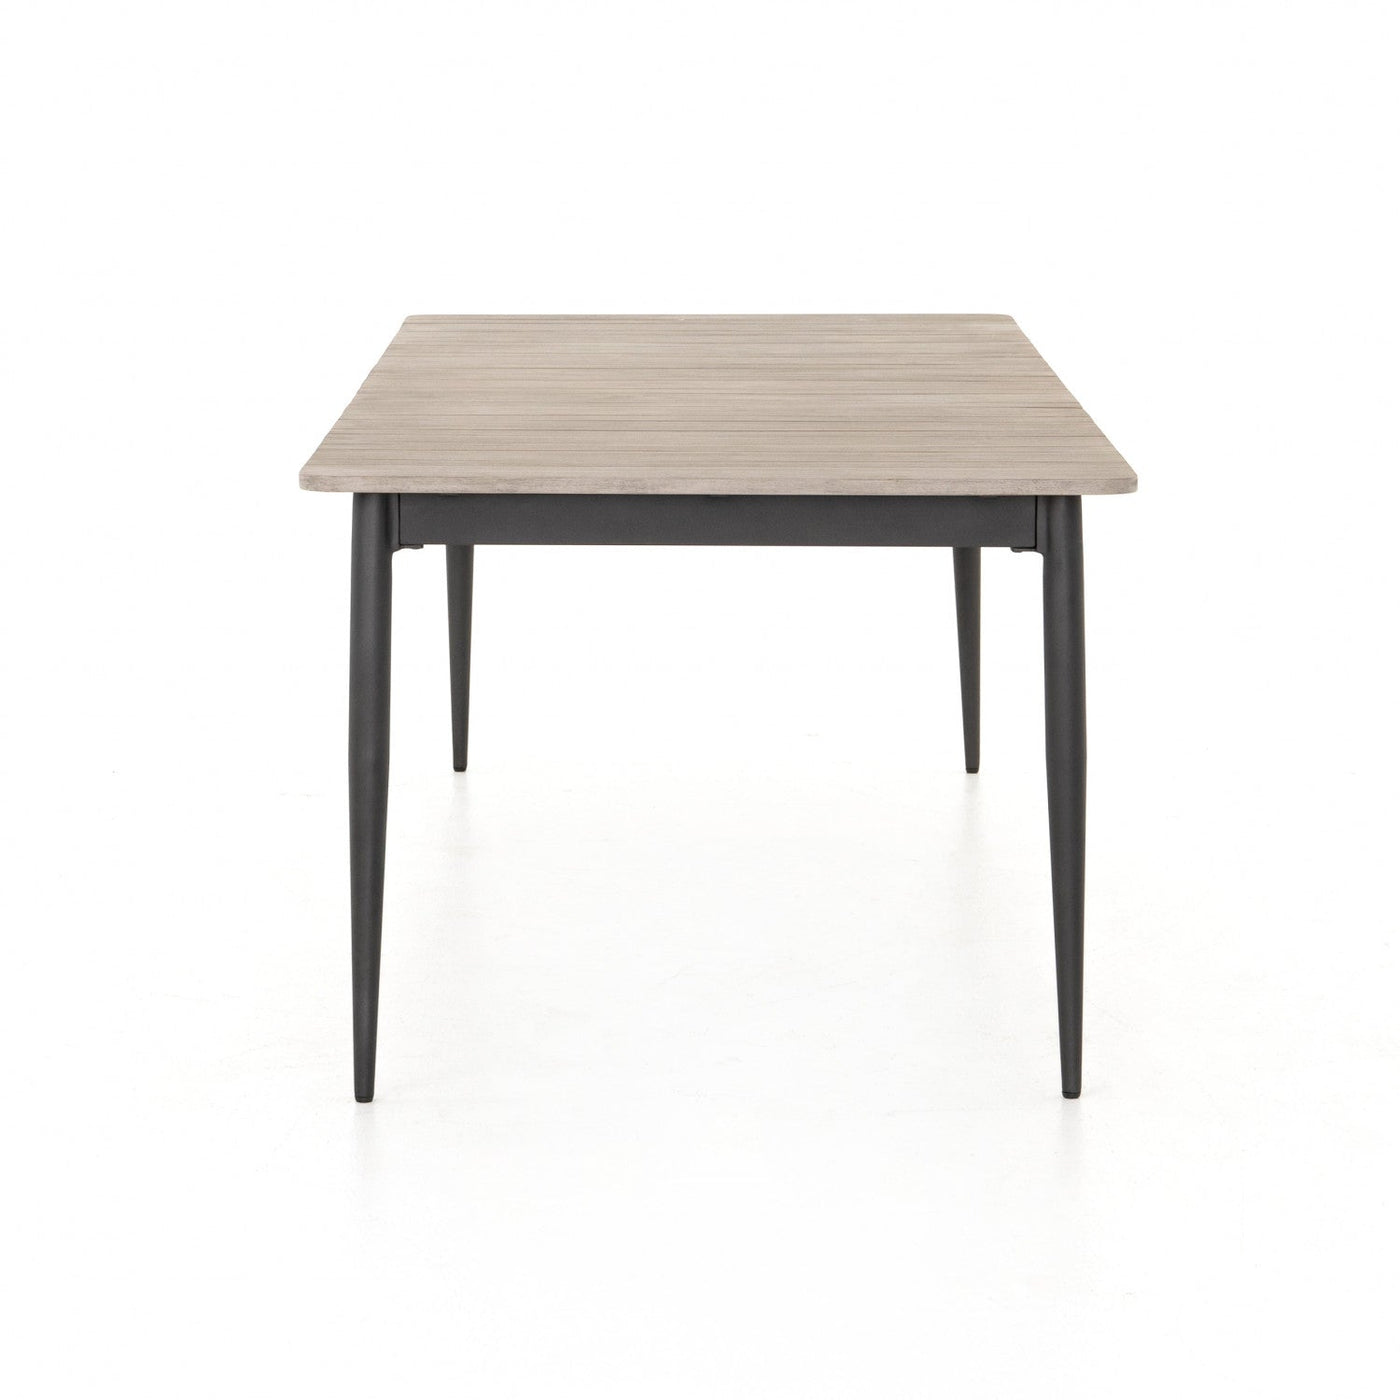 WYTON OUTDOOR DINING TABLE